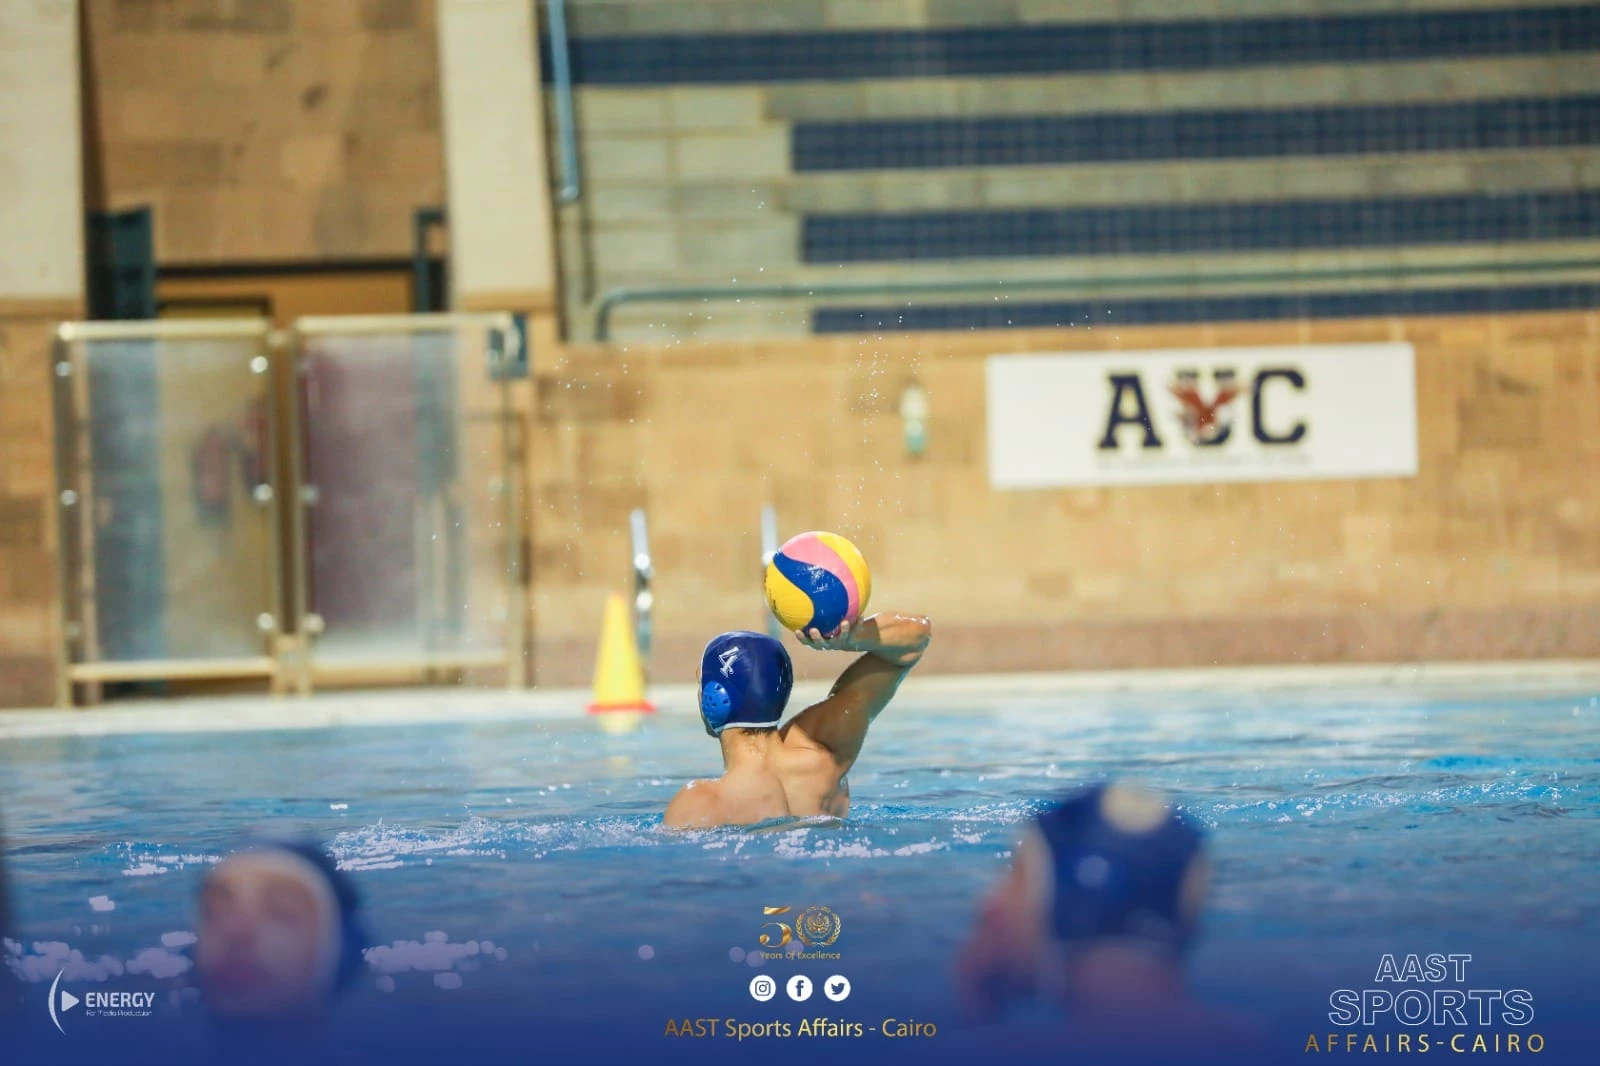 The Academy's water polo team in Cairo wins silver in the championship of private universities held at the American University in Cairo.4